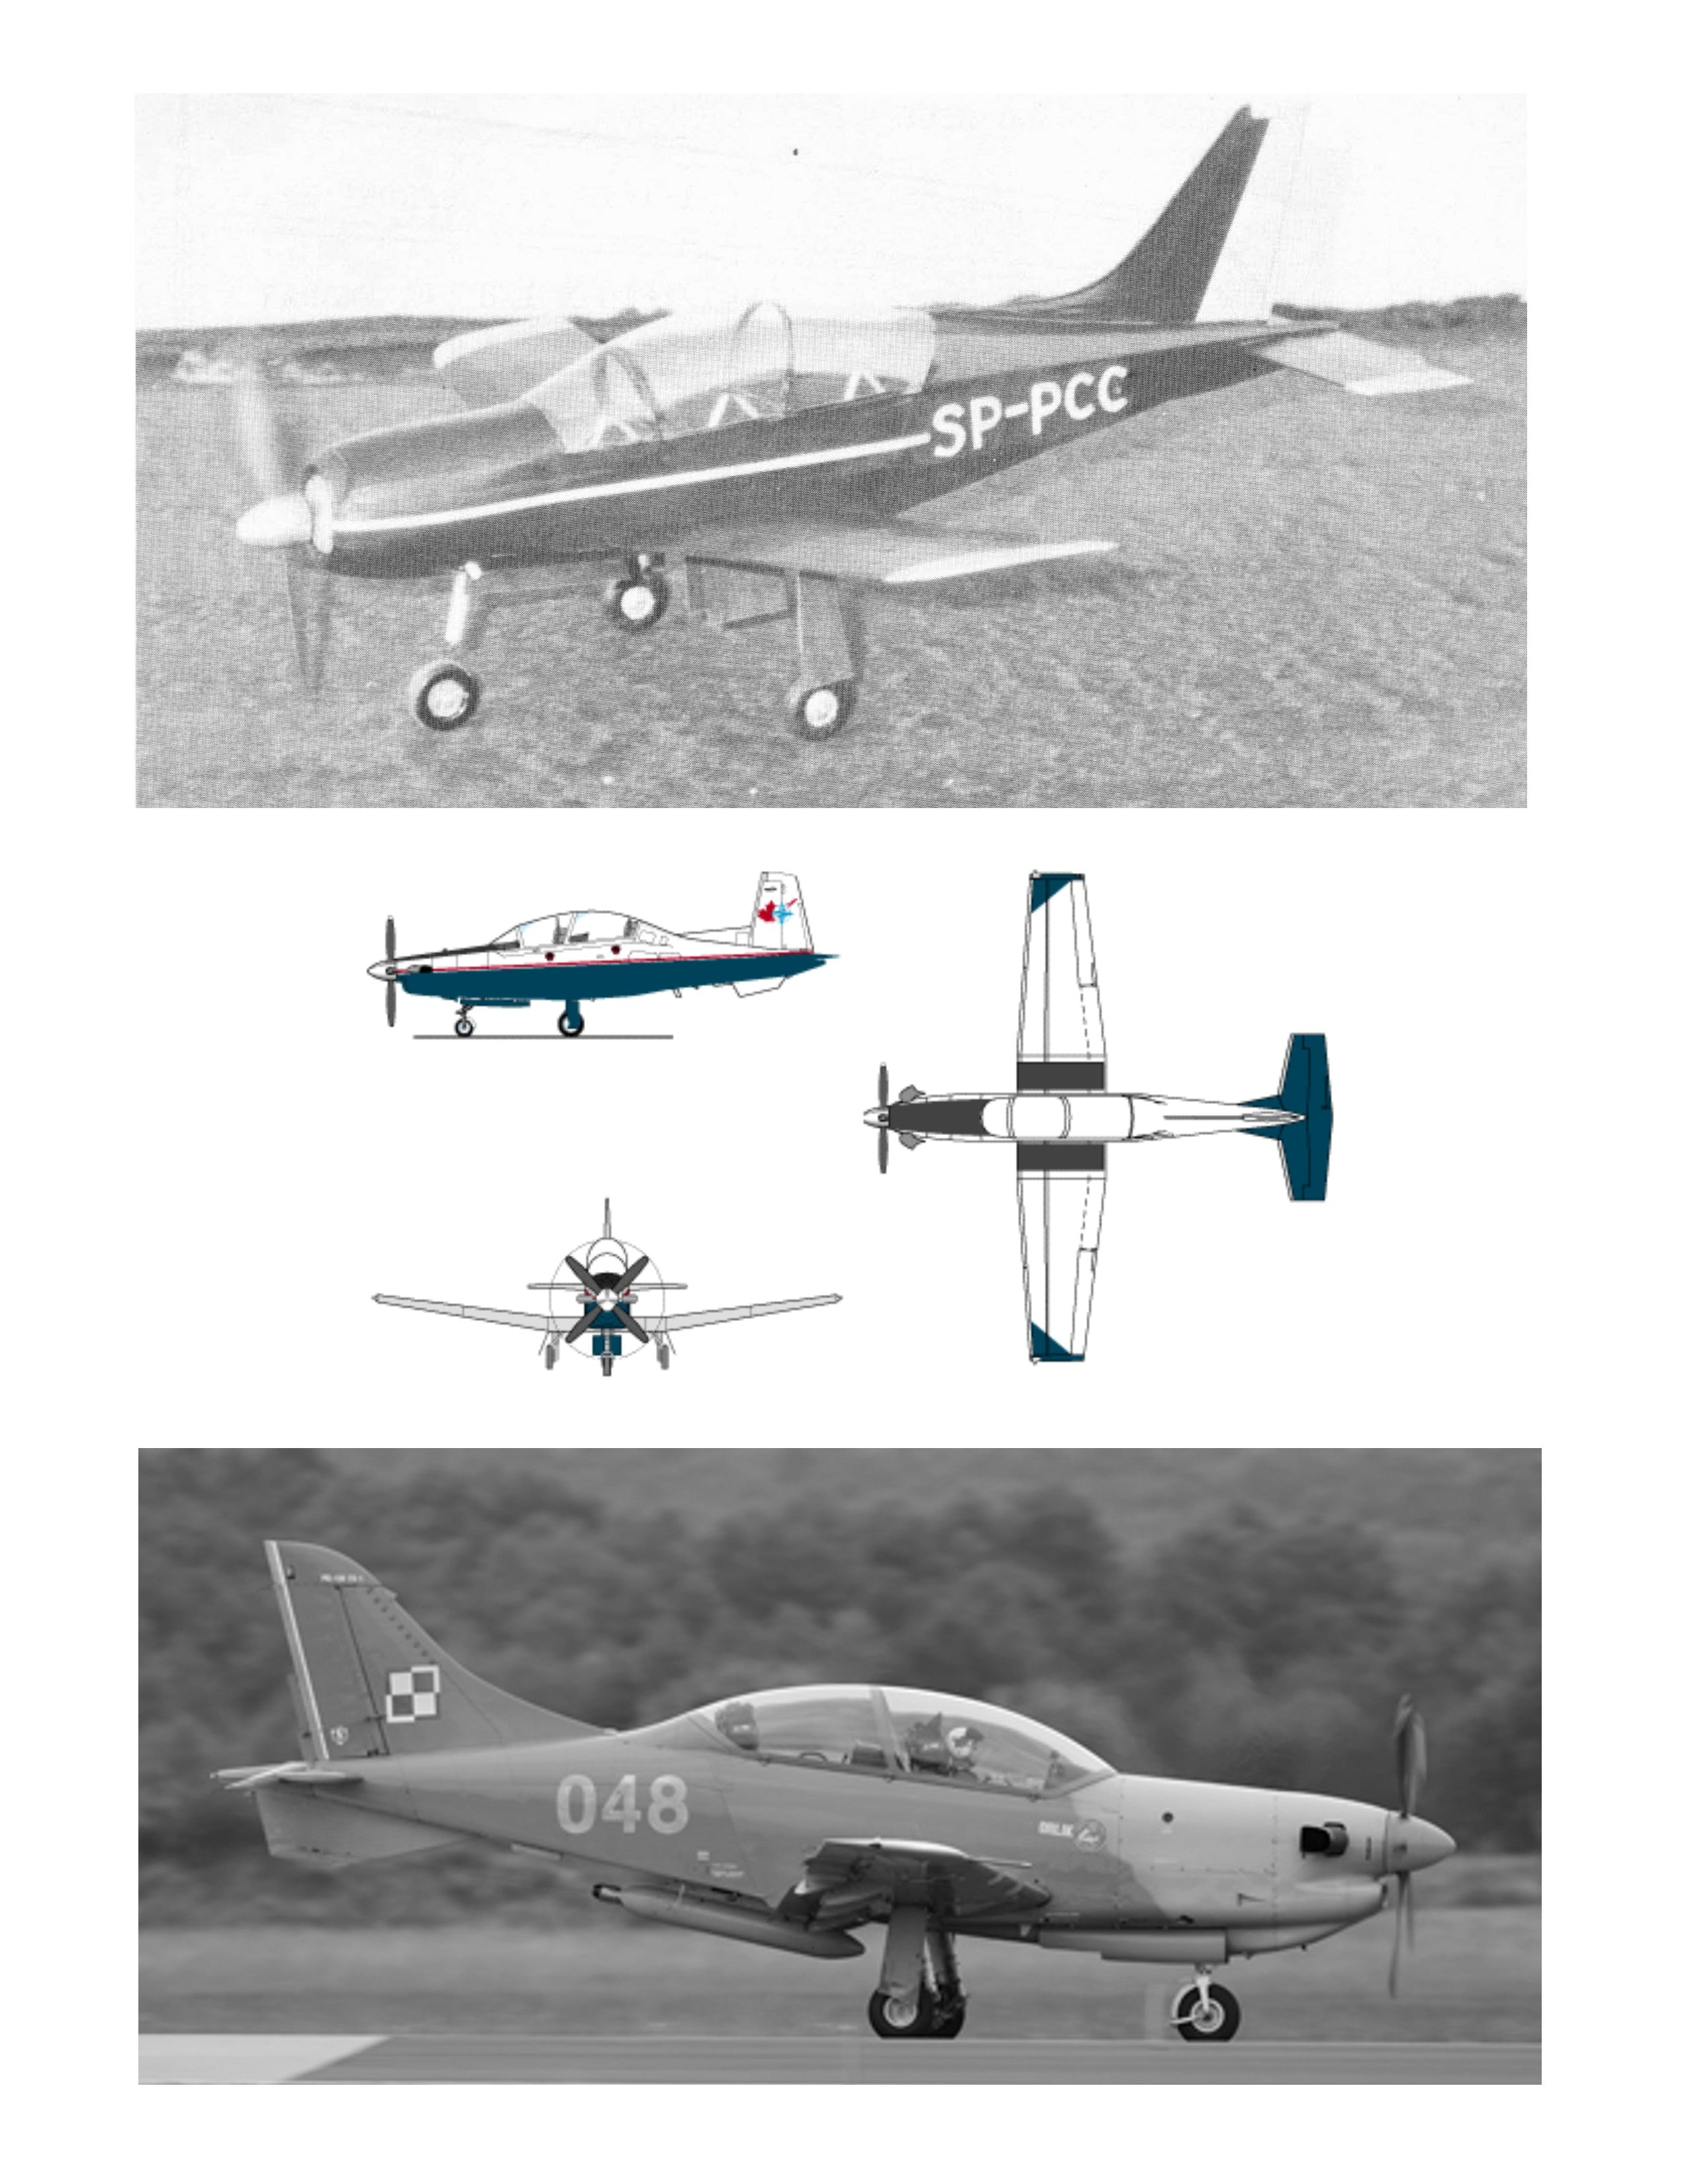 full size printed plans peanut scale "pzl orlik" design is well-suited to a peanut version.